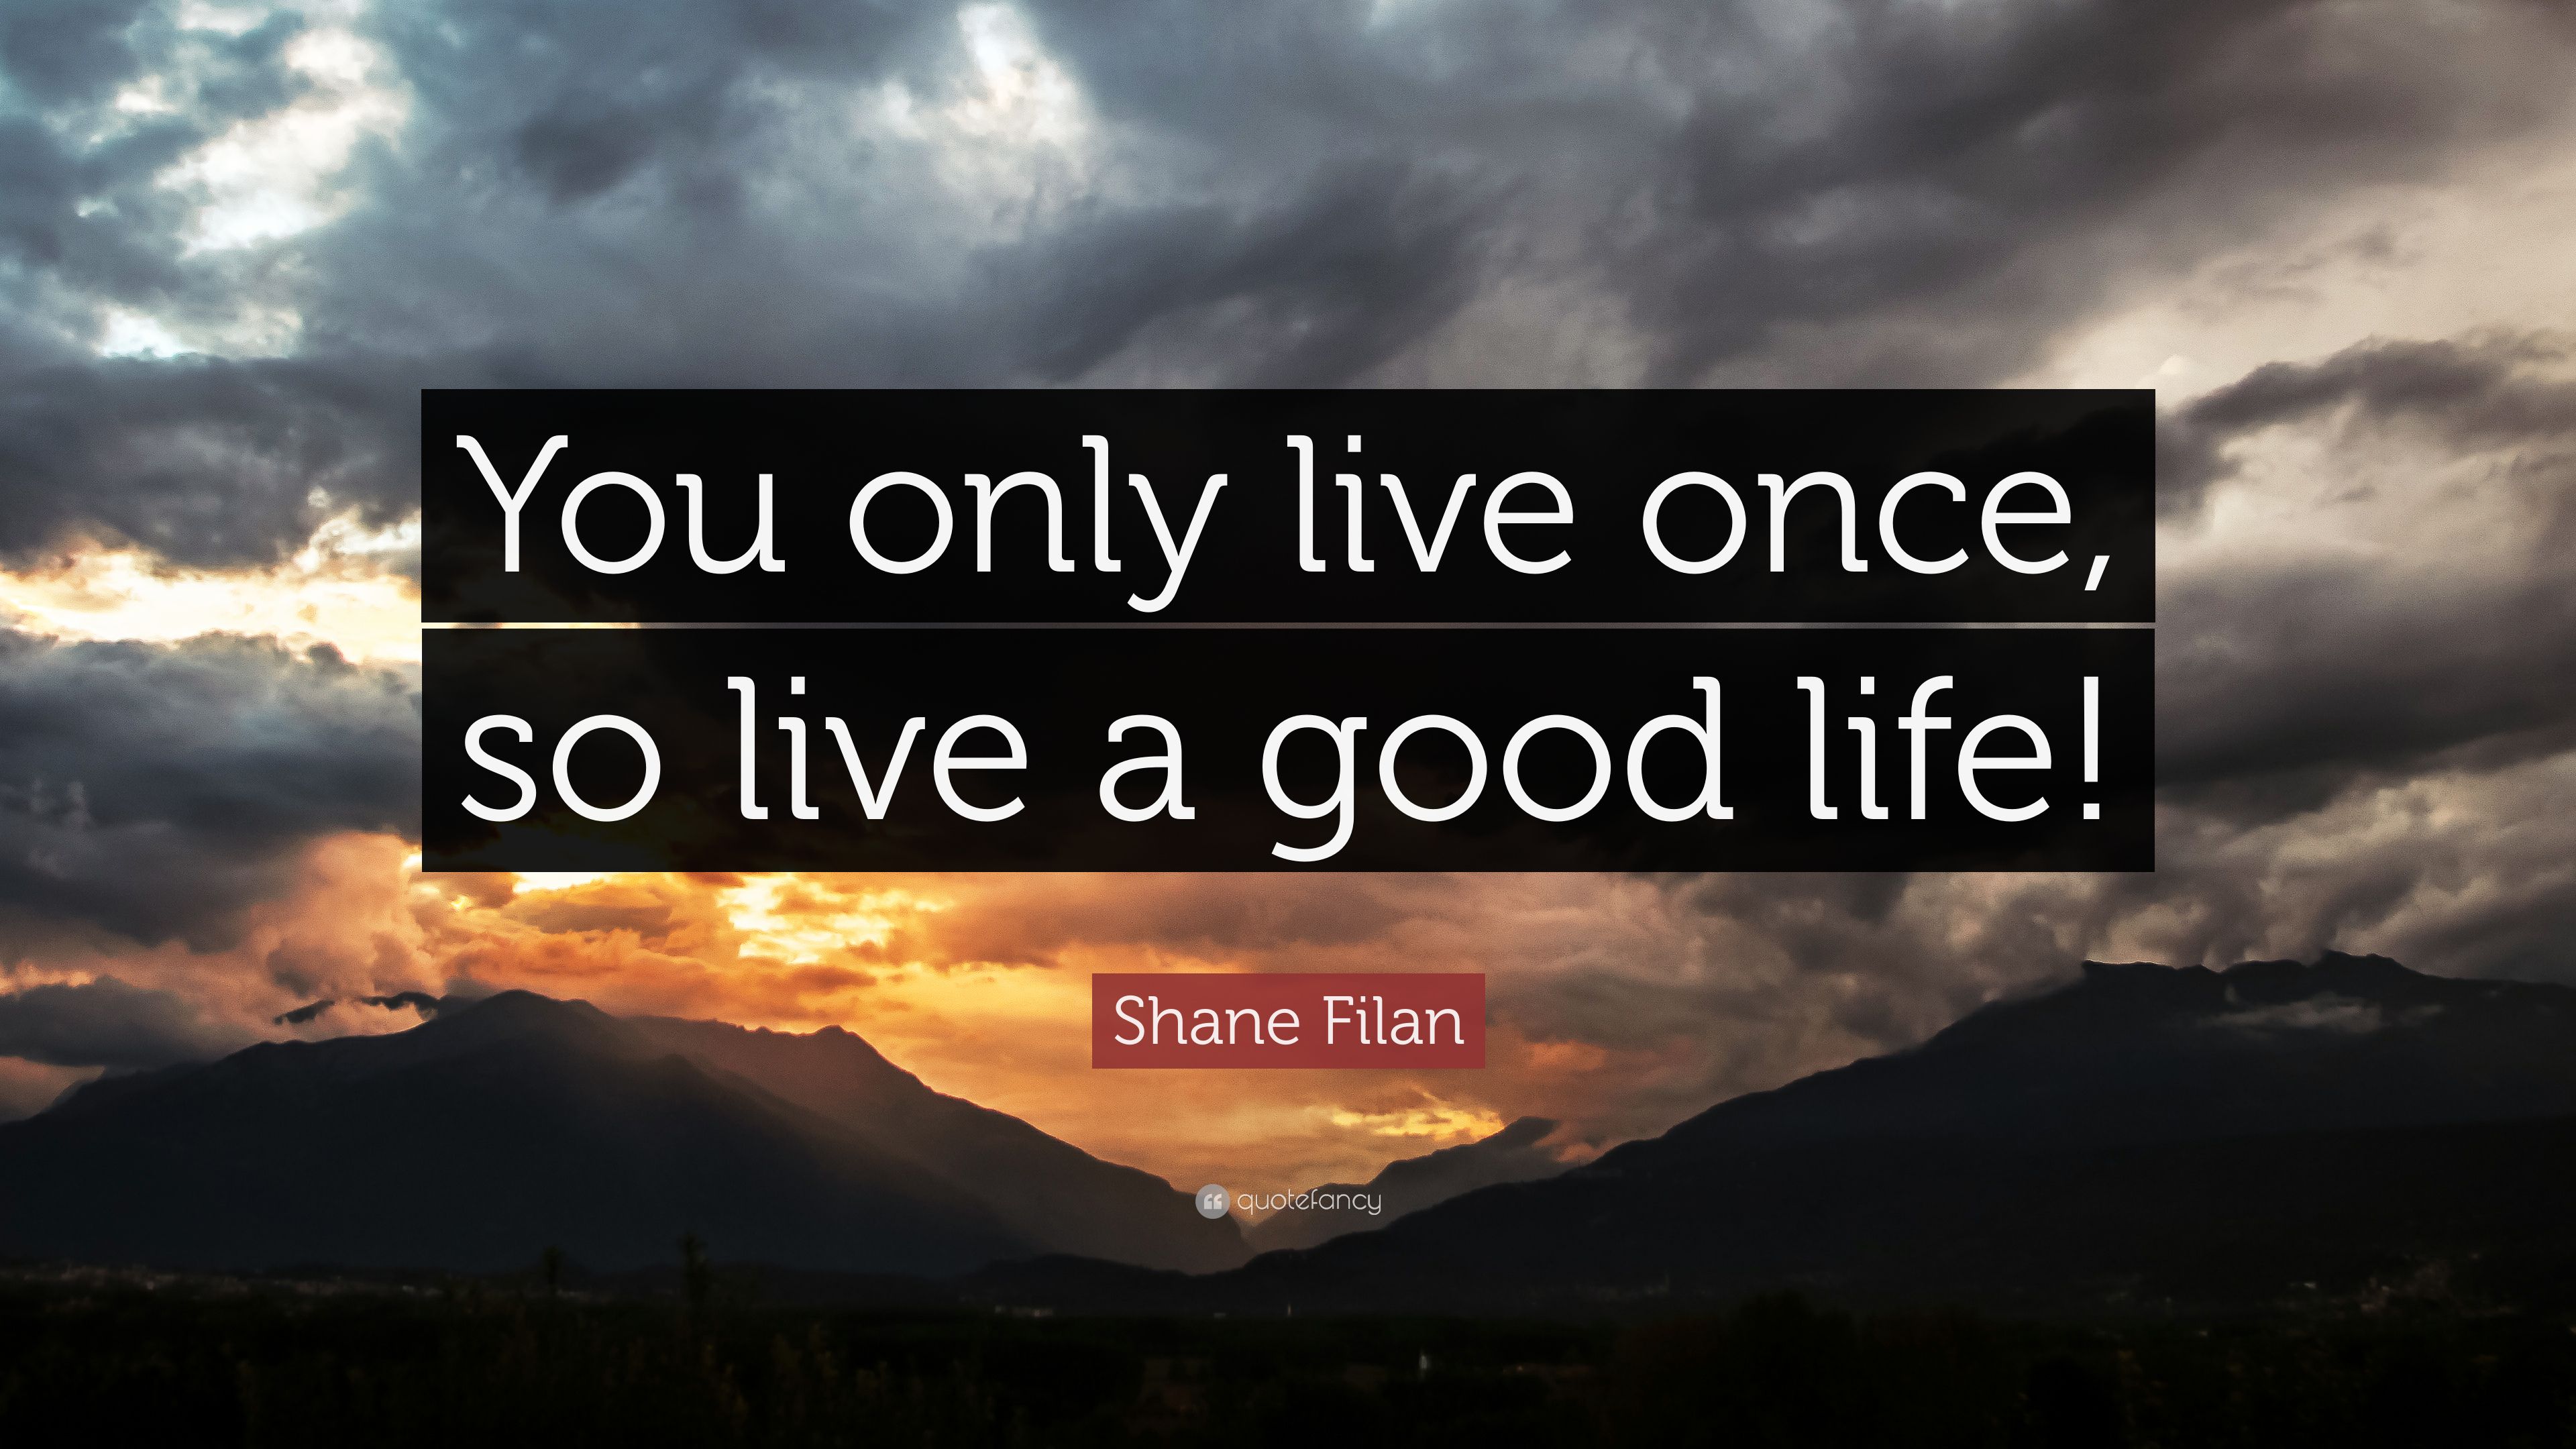 Shane Filan Quote: “You only live once, so live a good life!” (7 wallpaper)